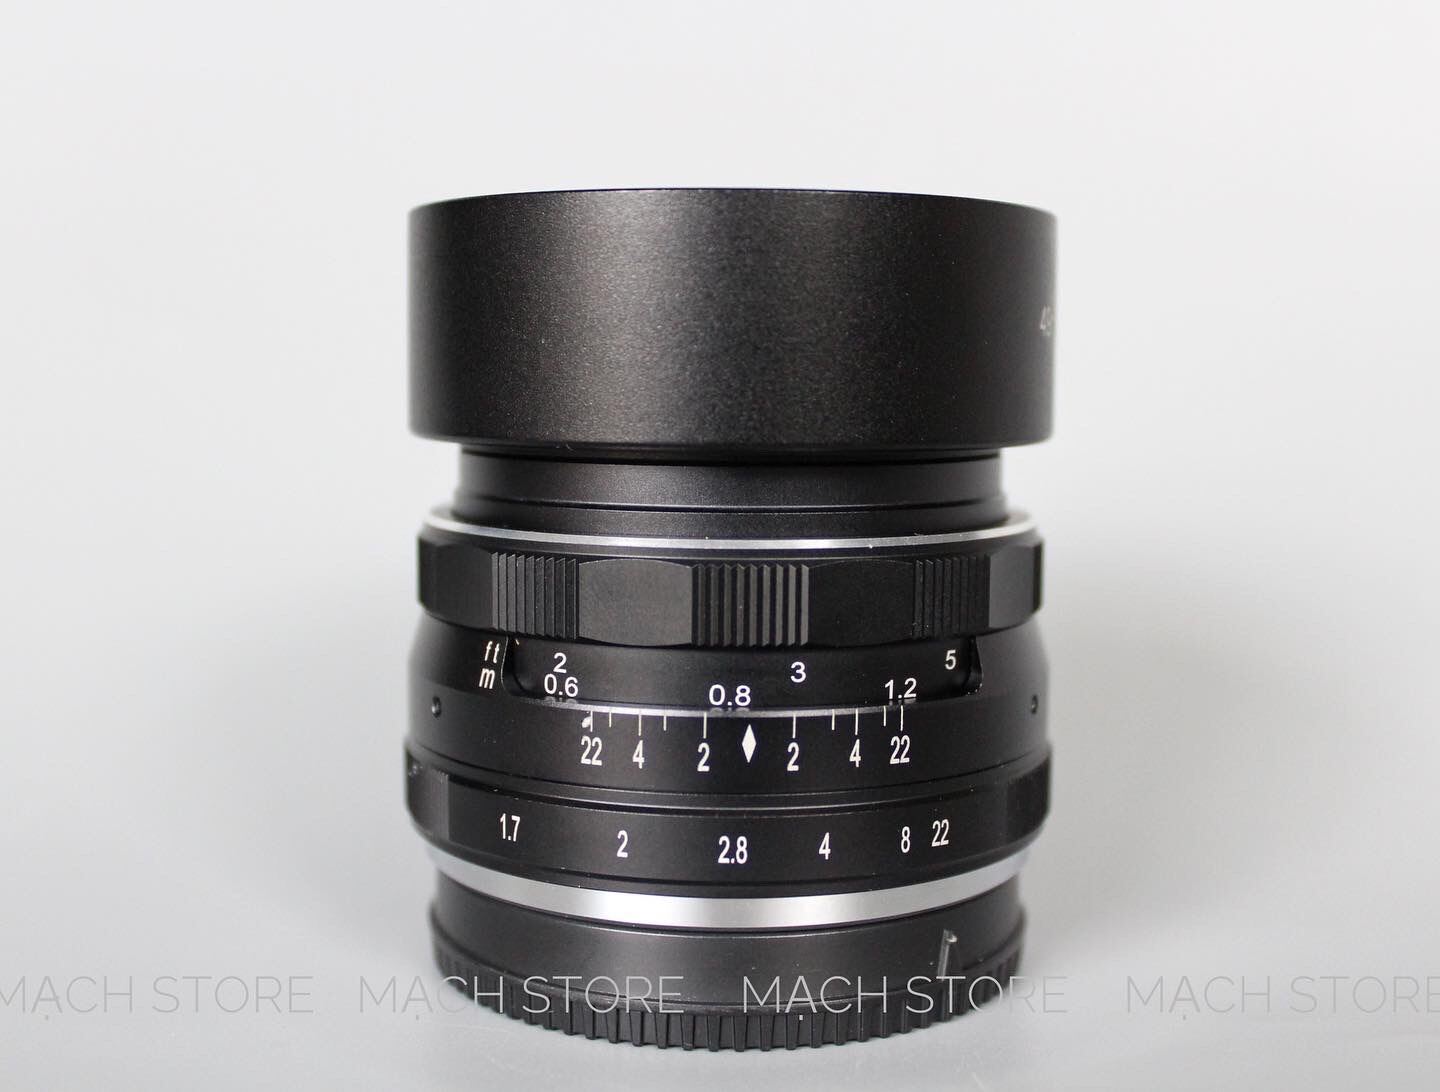 LENS MF MEIKE 35MM F 1.7 For Canon EOS-M